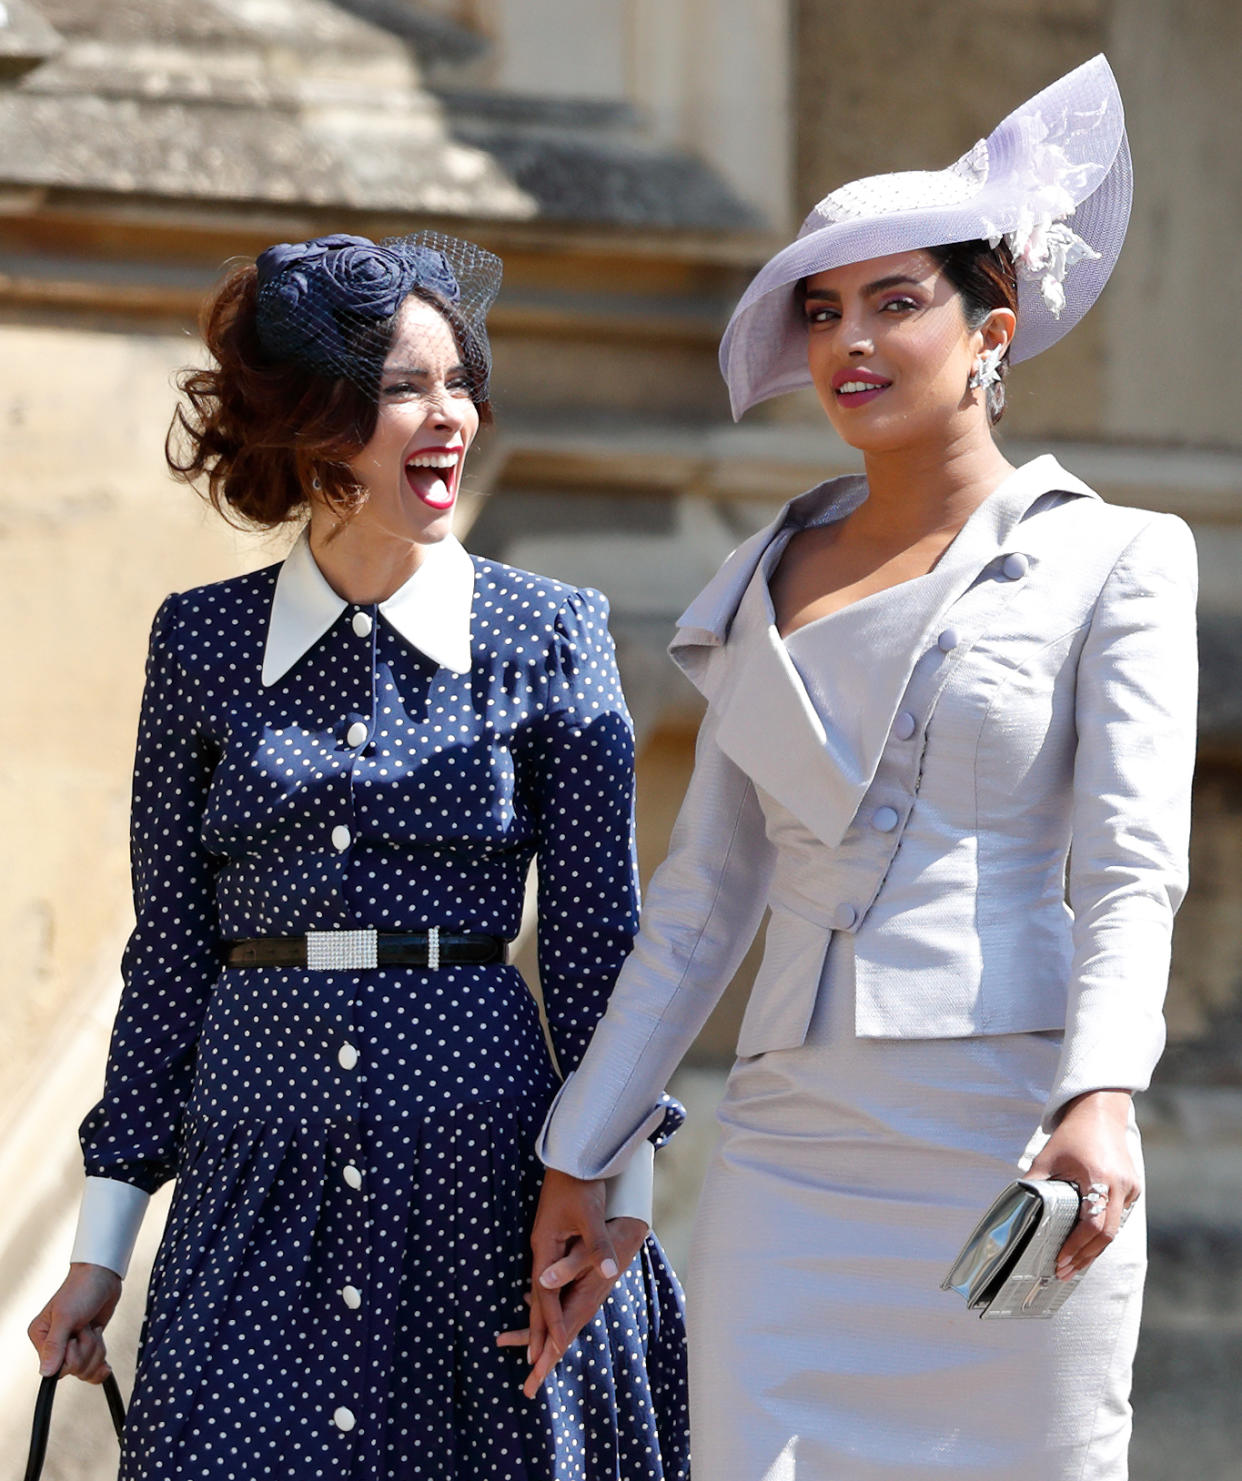 WINDSOR, UNITED KINGDOM - MAY 19: (EMBARGOED FOR PUBLICATION IN UK NEWSPAPERS UNTIL 24 HOURS AFTER CREATE DATE AND TIME) Abigail Spencer and Priyanka Chopra attend the wedding of Prince Harry to Ms Meghan Markle at St George's Chapel, Windsor Castle on May 19, 2018 in Windsor, England. Prince Henry Charles Albert David of Wales marries Ms. Meghan Markle in a service at St George's Chapel inside the grounds of Windsor Castle. Among the guests were 2200 members of the public, the royal family and Ms. Markle's Mother Doria Ragland. (Photo by Max Mumby/Indigo/Getty Images)